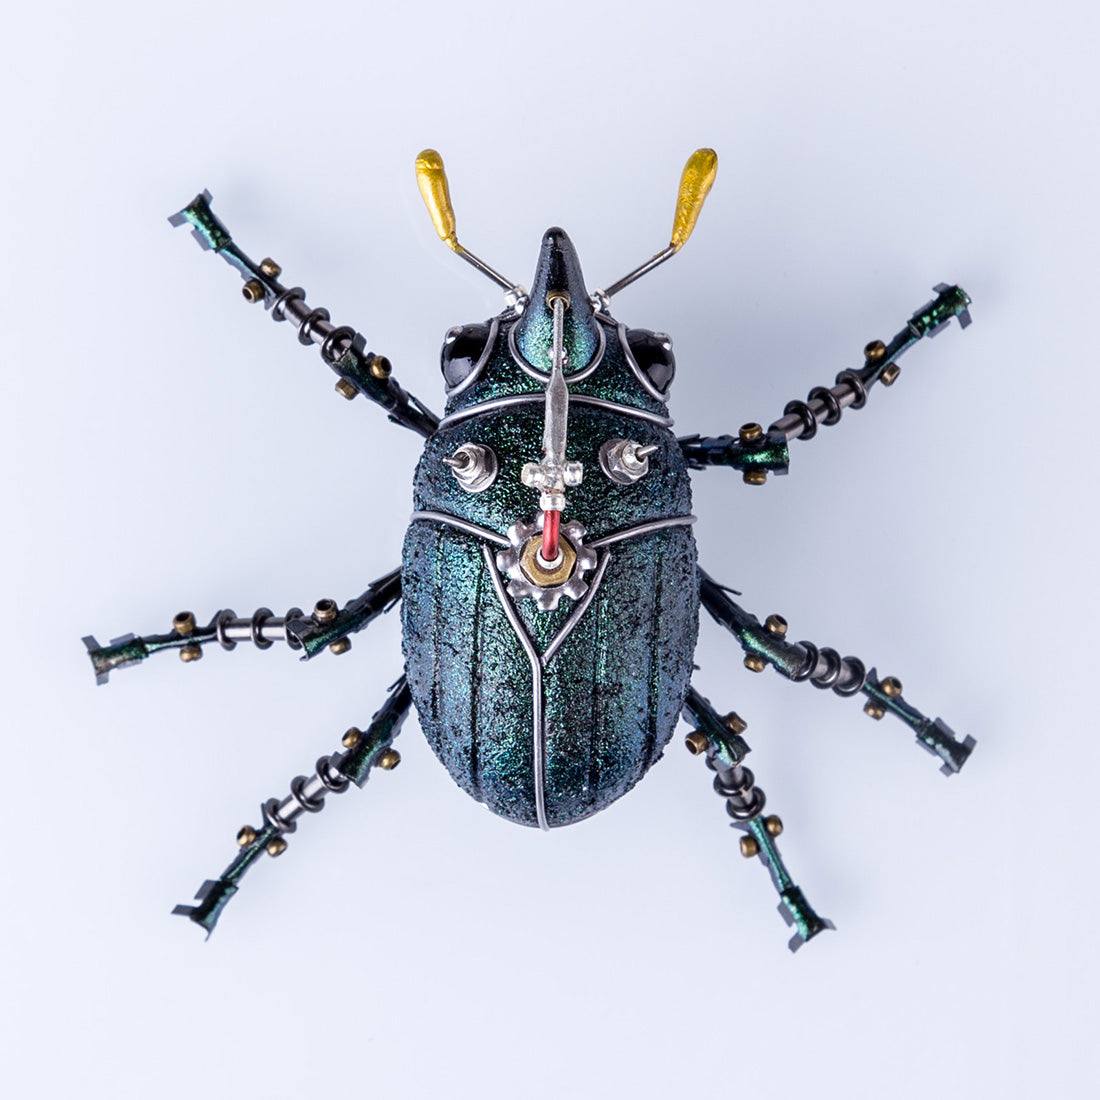 Little Green Beetle Steampunk Insect Metal Bug Model